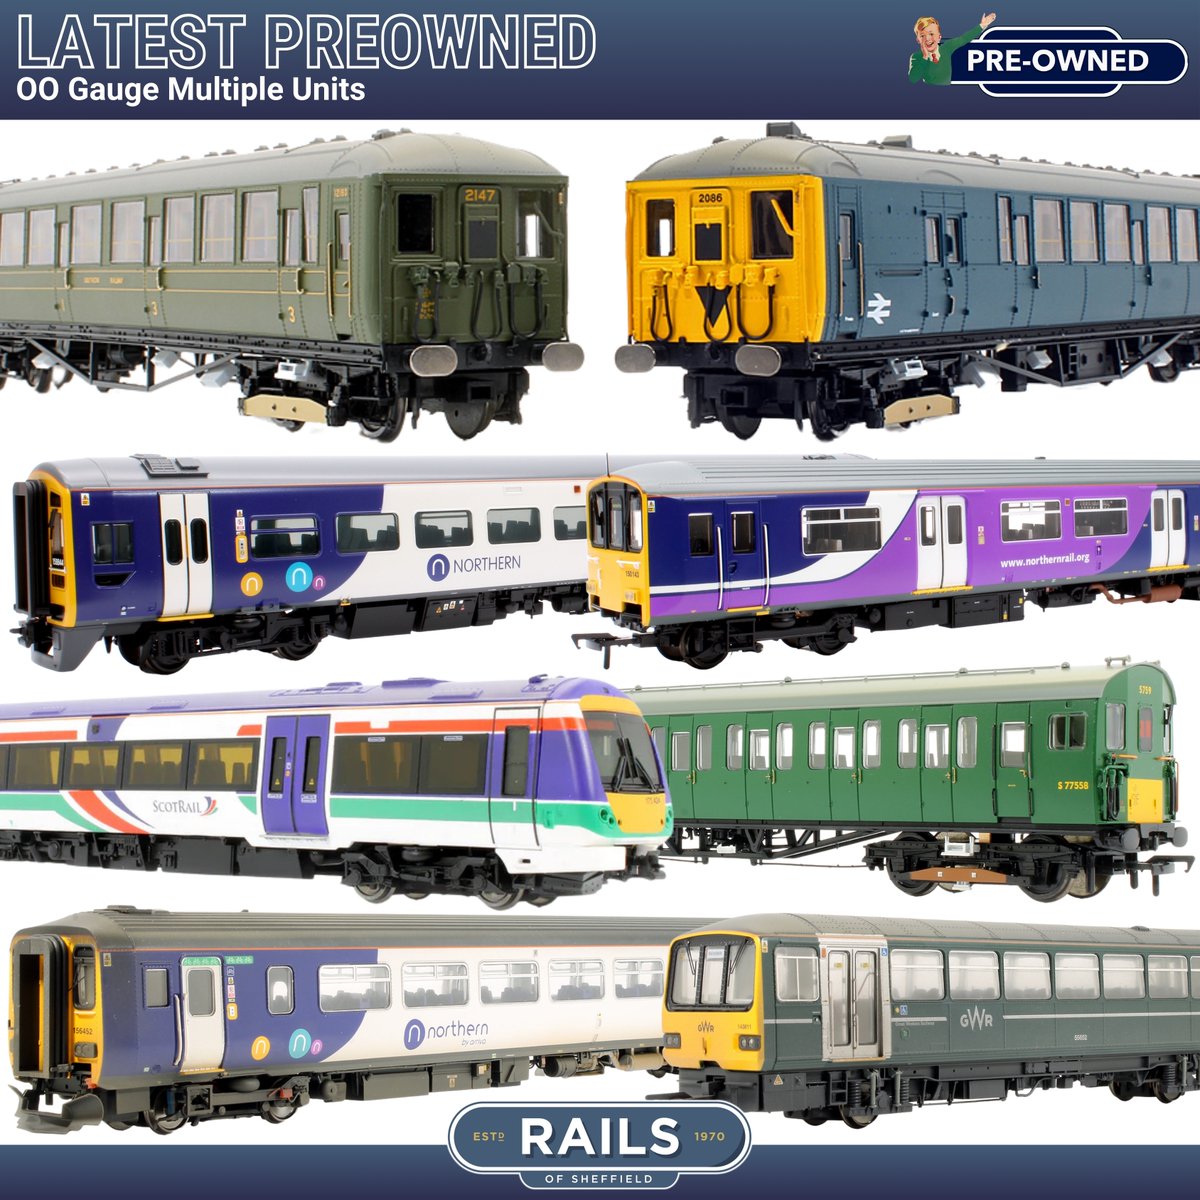 🚞 We currently have a variety of quality OO Gauge Multiple Units in stock covering many regions and eras of operation! See all preowned: tinyurl.com/2z7zuy7k

DMUs: tinyurl.com/4hymw48w
EMUs: tinyurl.com/4v62c2cs